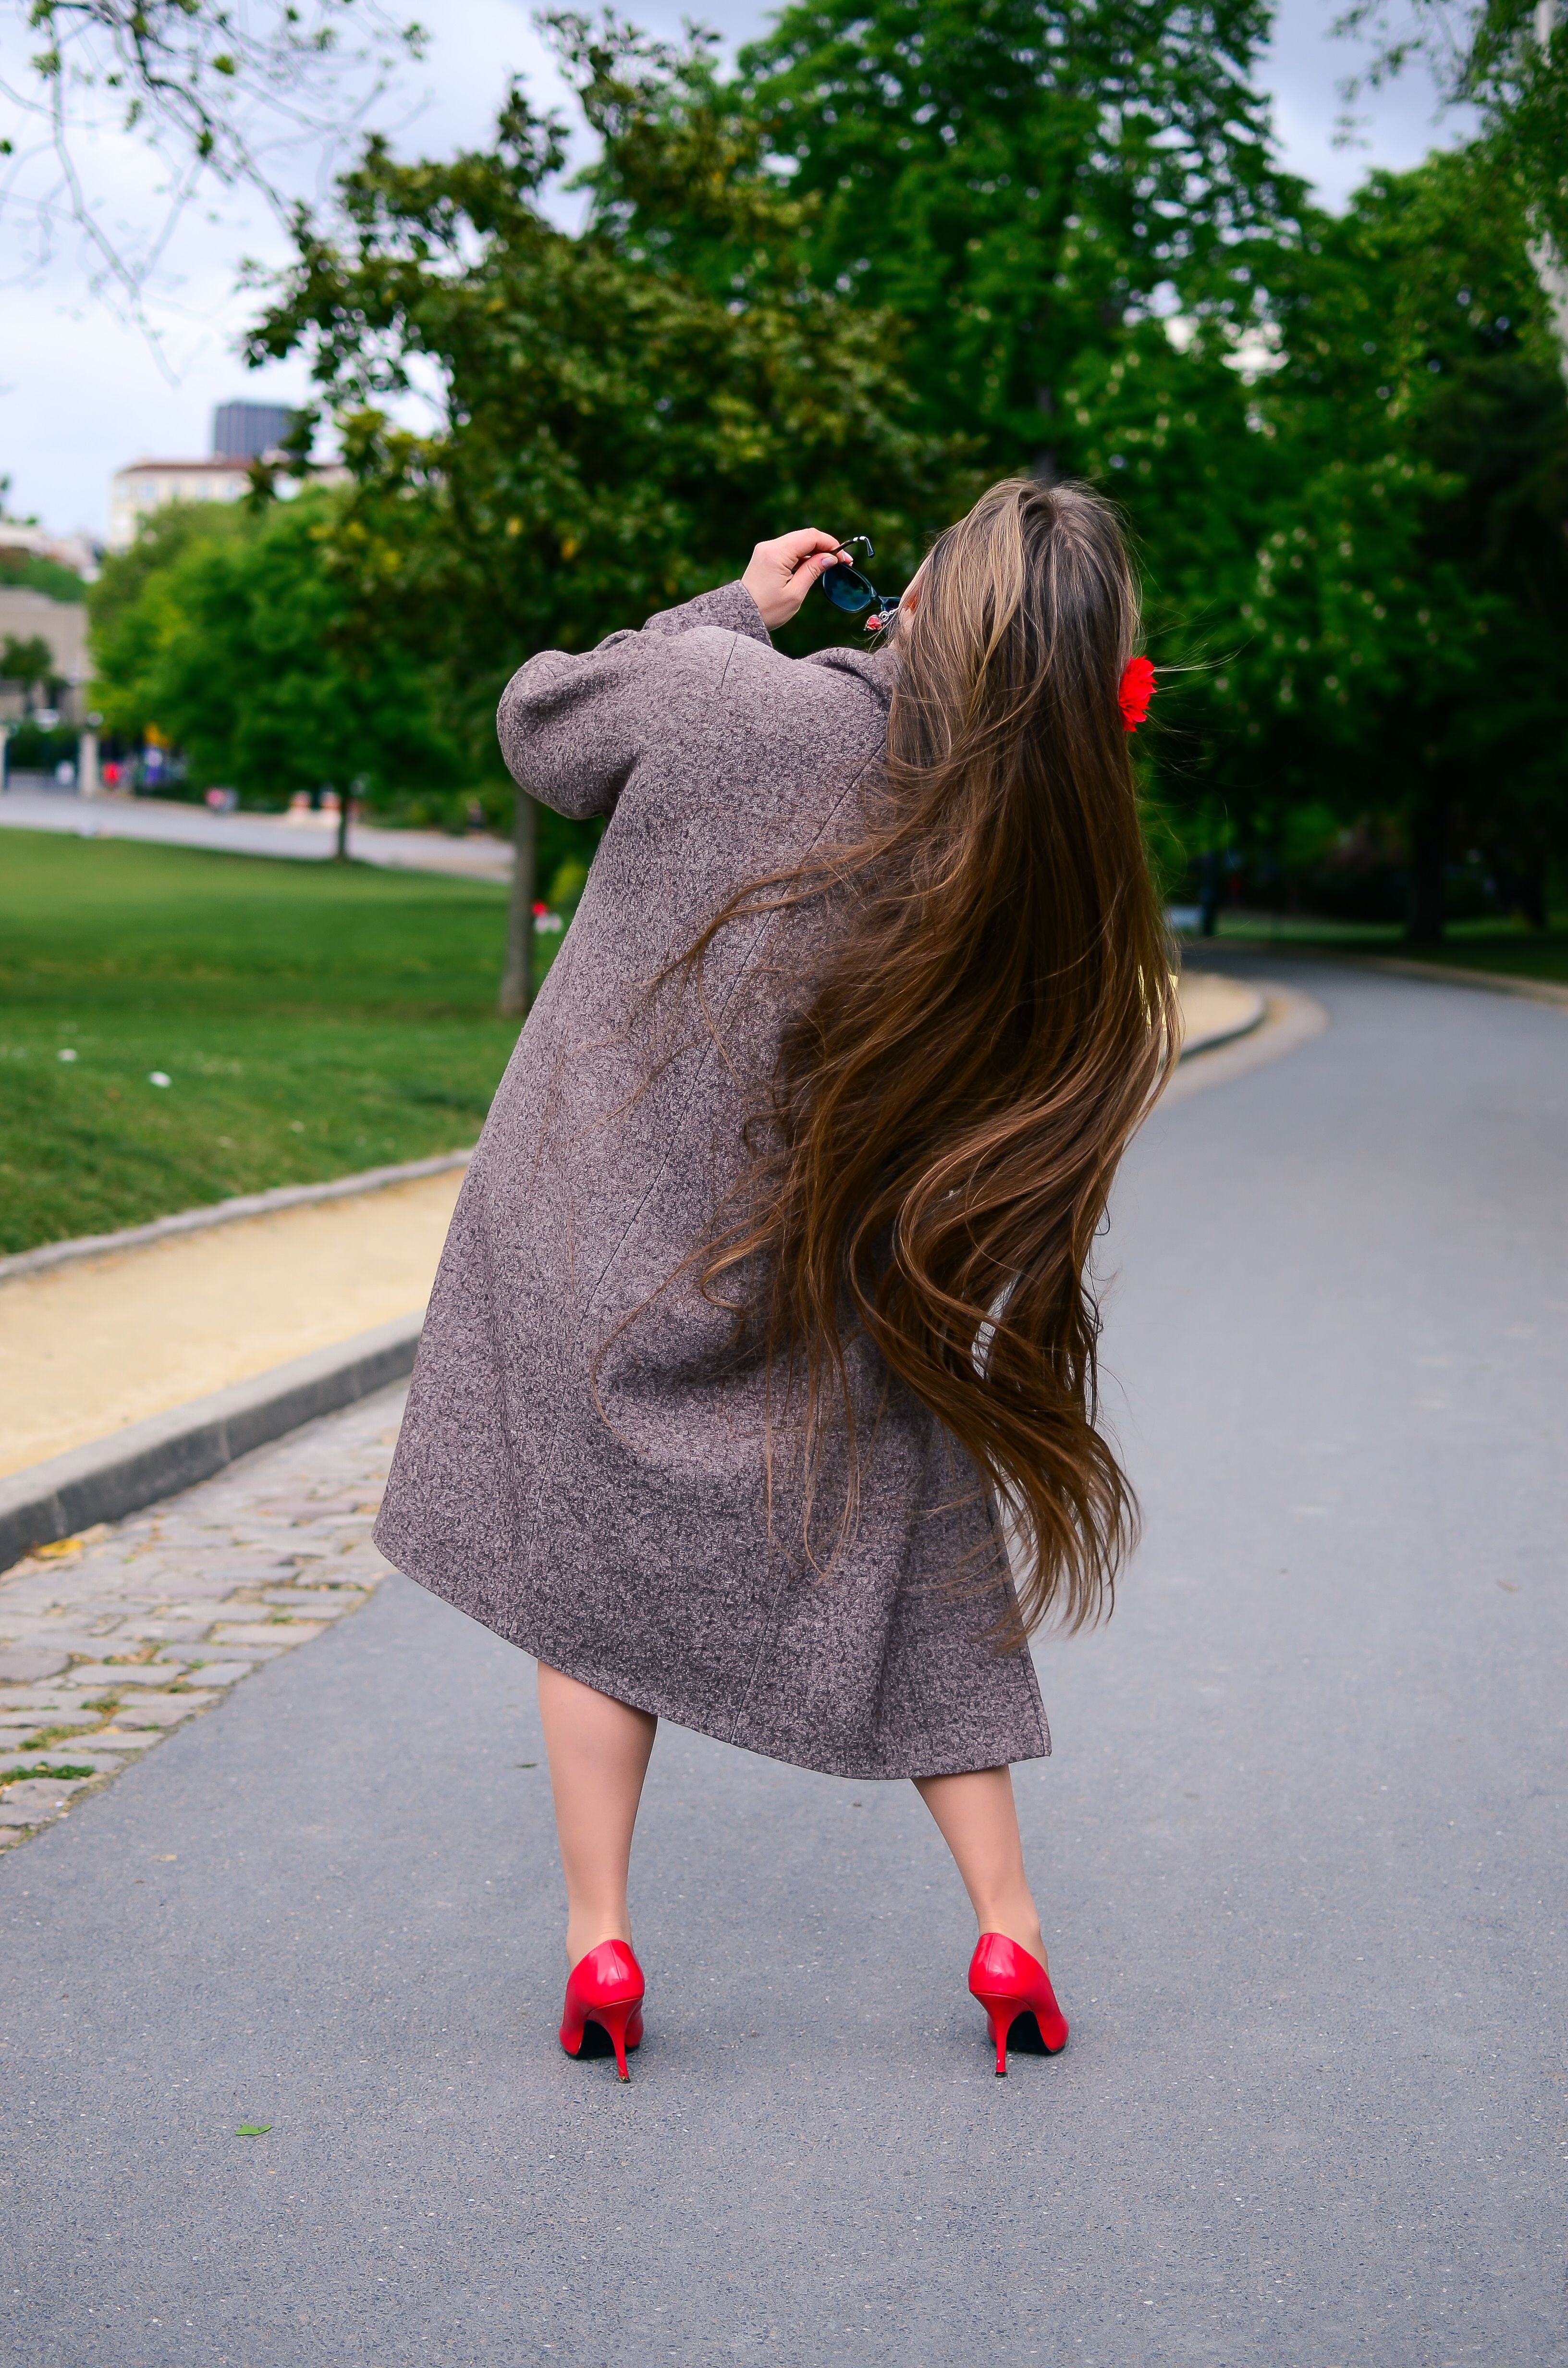 A rear view of a woman with extremely long brunette hair | Source: Shutterstock